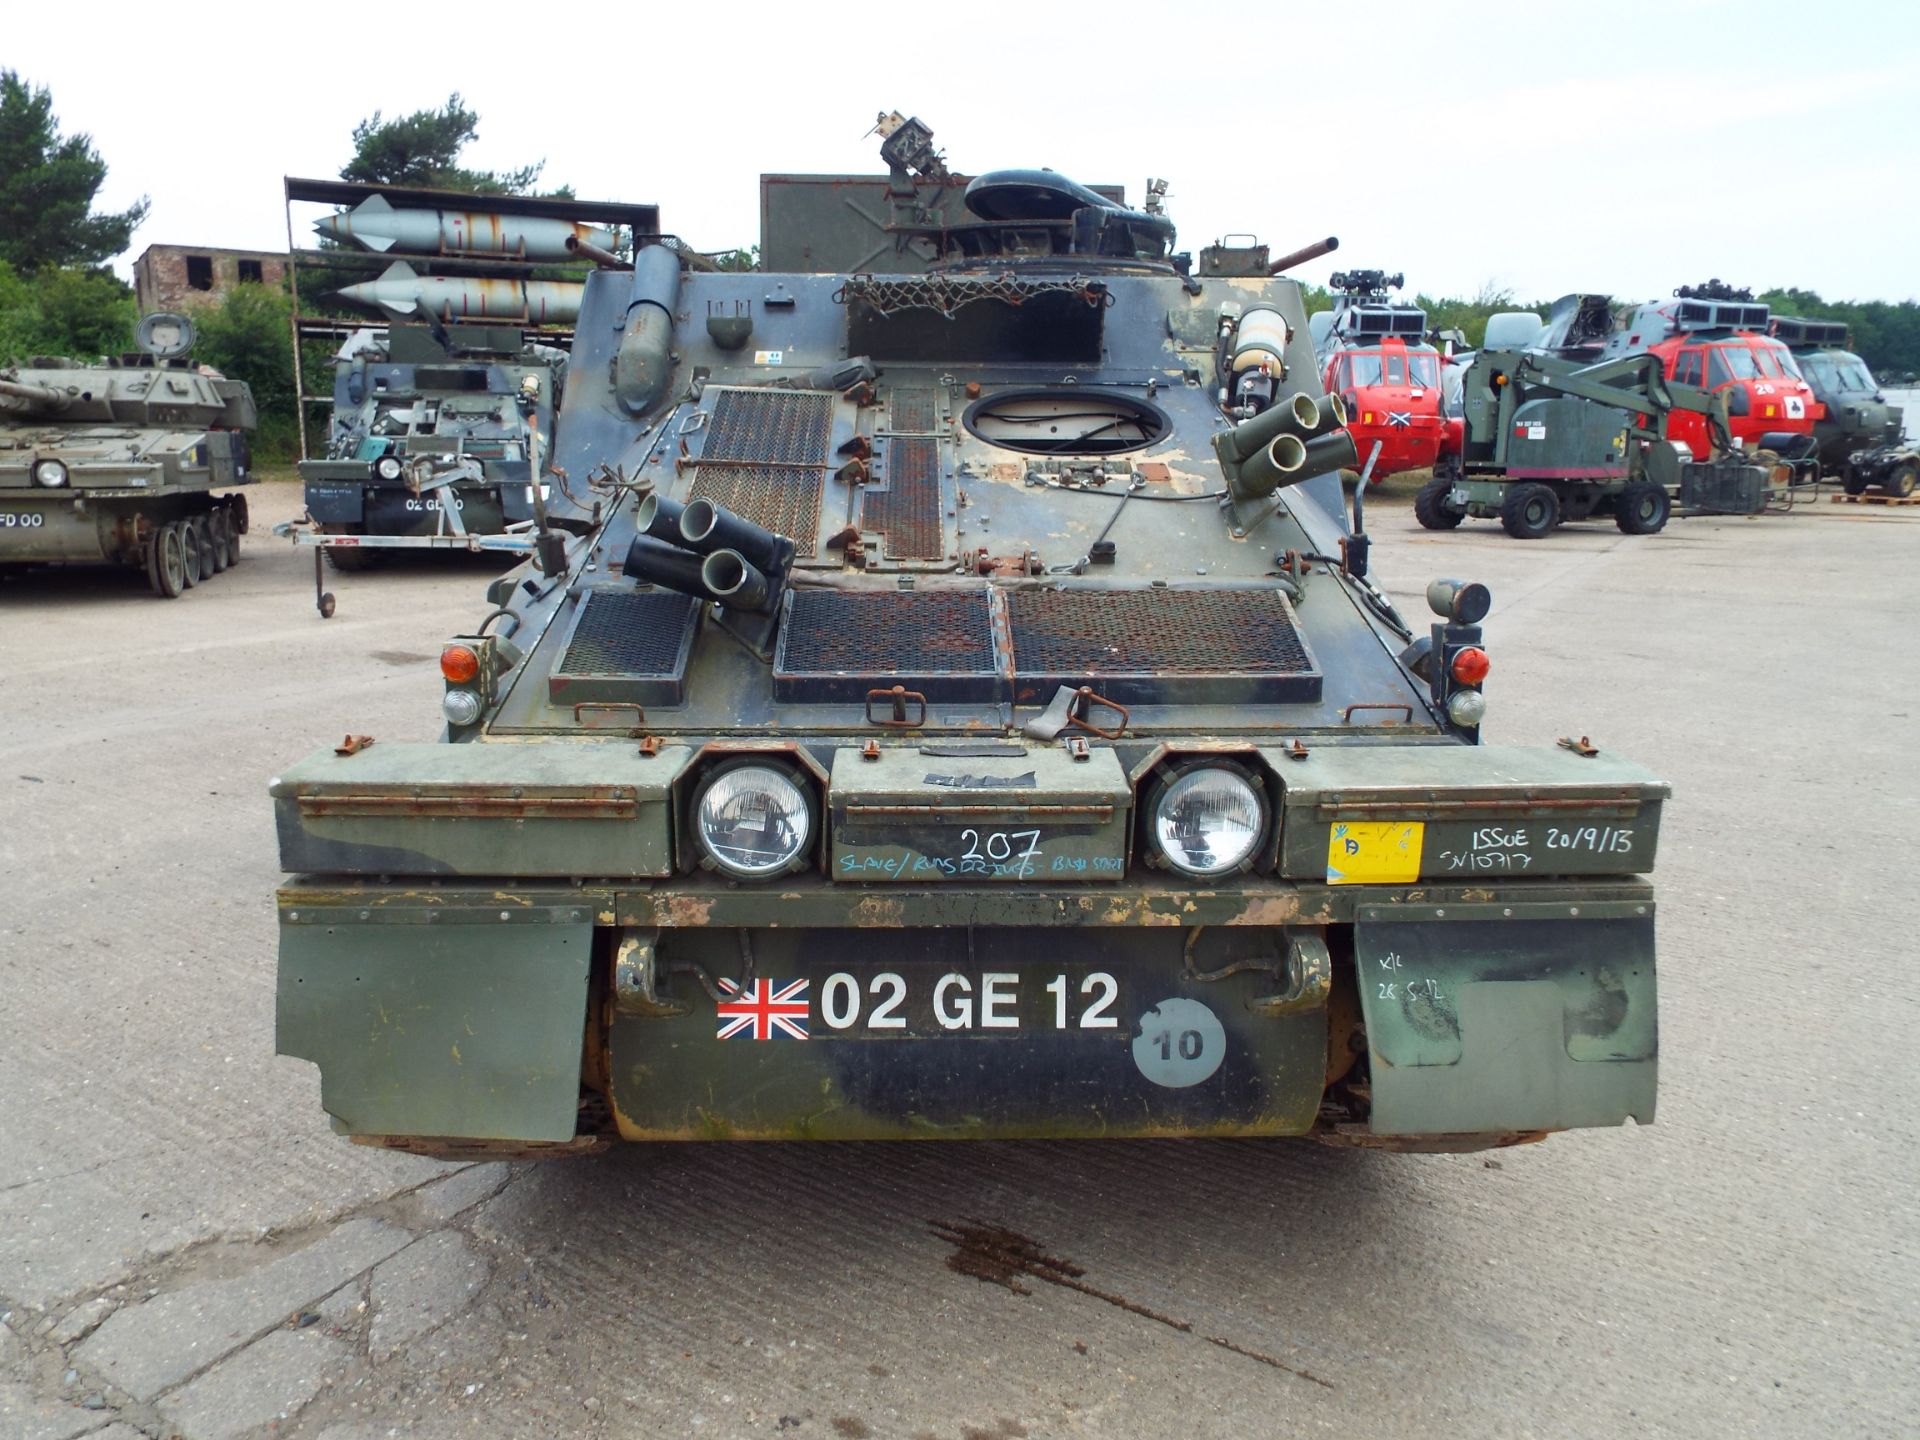 CVRT (Combat Vehicle Reconnaissance Tracked) FV105 Sultan Armoured Personnel Carrier - Image 2 of 26